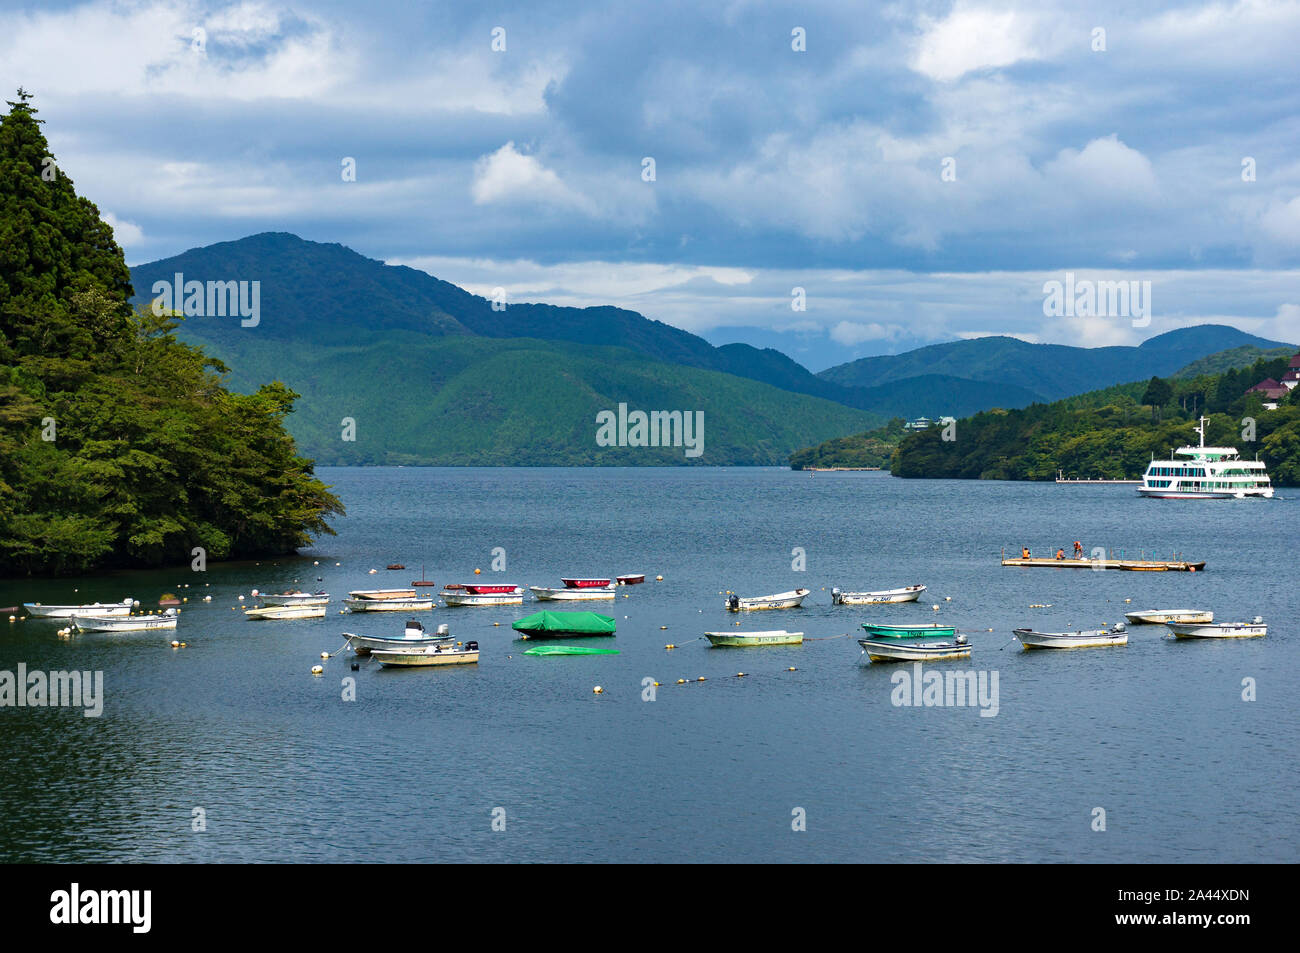 Hakone, Japan - September 3, 2016: Colorful fishing boats with mountains on the background on caldera lake Ashi. Ashi lake is volcano crater lake in M Stock Photo